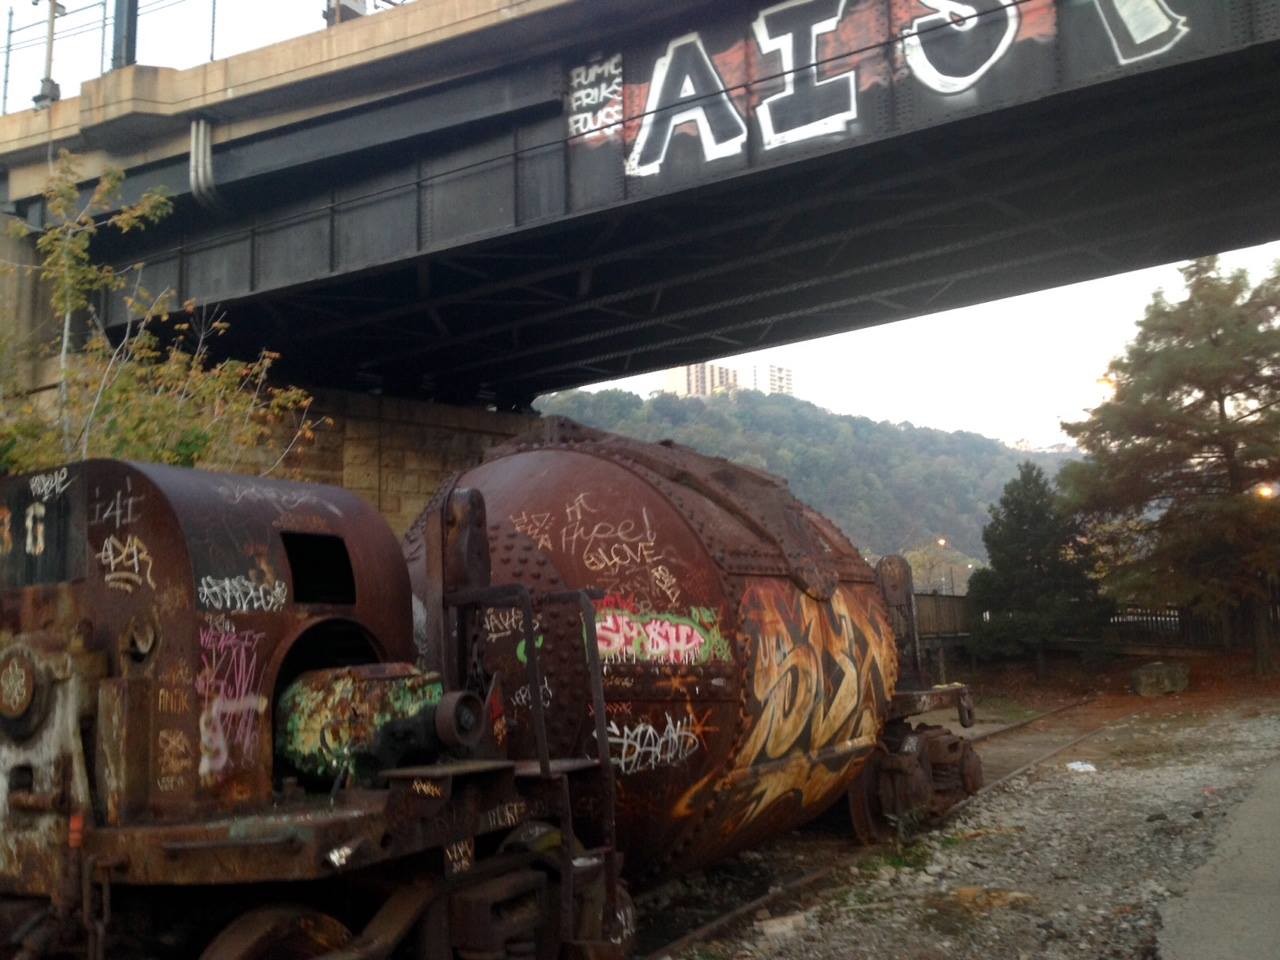 Rusty train cars sit idle on abandoned tracks, monuments to Pittsburgh's industrial past.